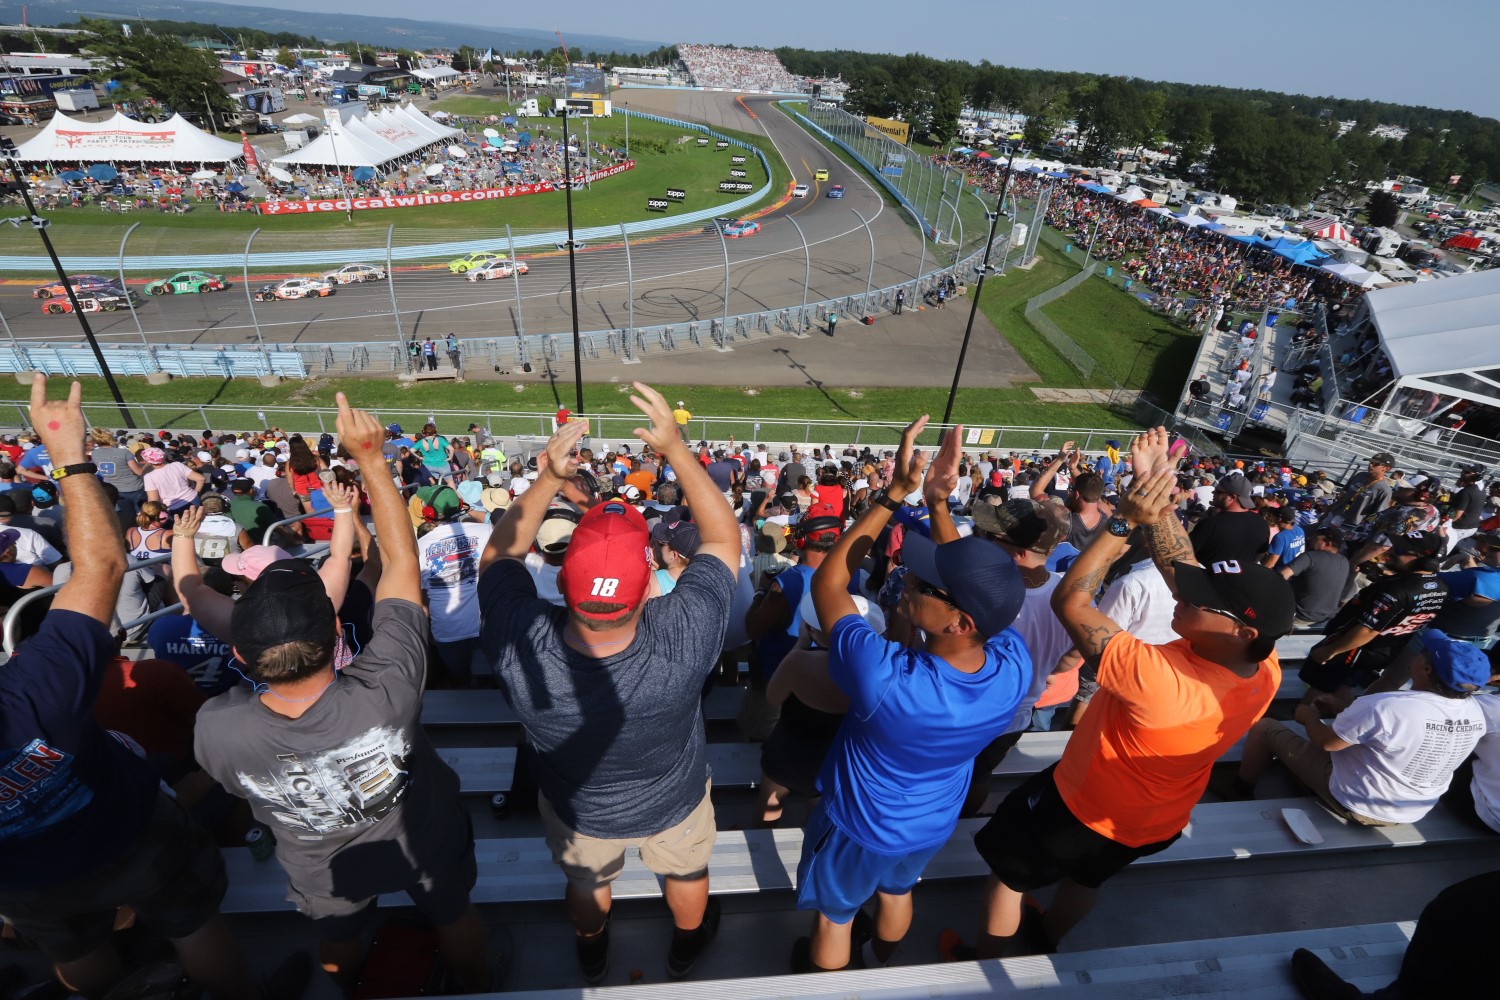 NASCAR sells out at a track indyCar could not draw flies. Why? 100% of IndyCar races at ISC owned tracks have failed.  Do you see a pattern? The France family's secret motto must be, keep your friends close, keep your enemies (IndyCar) even closer.